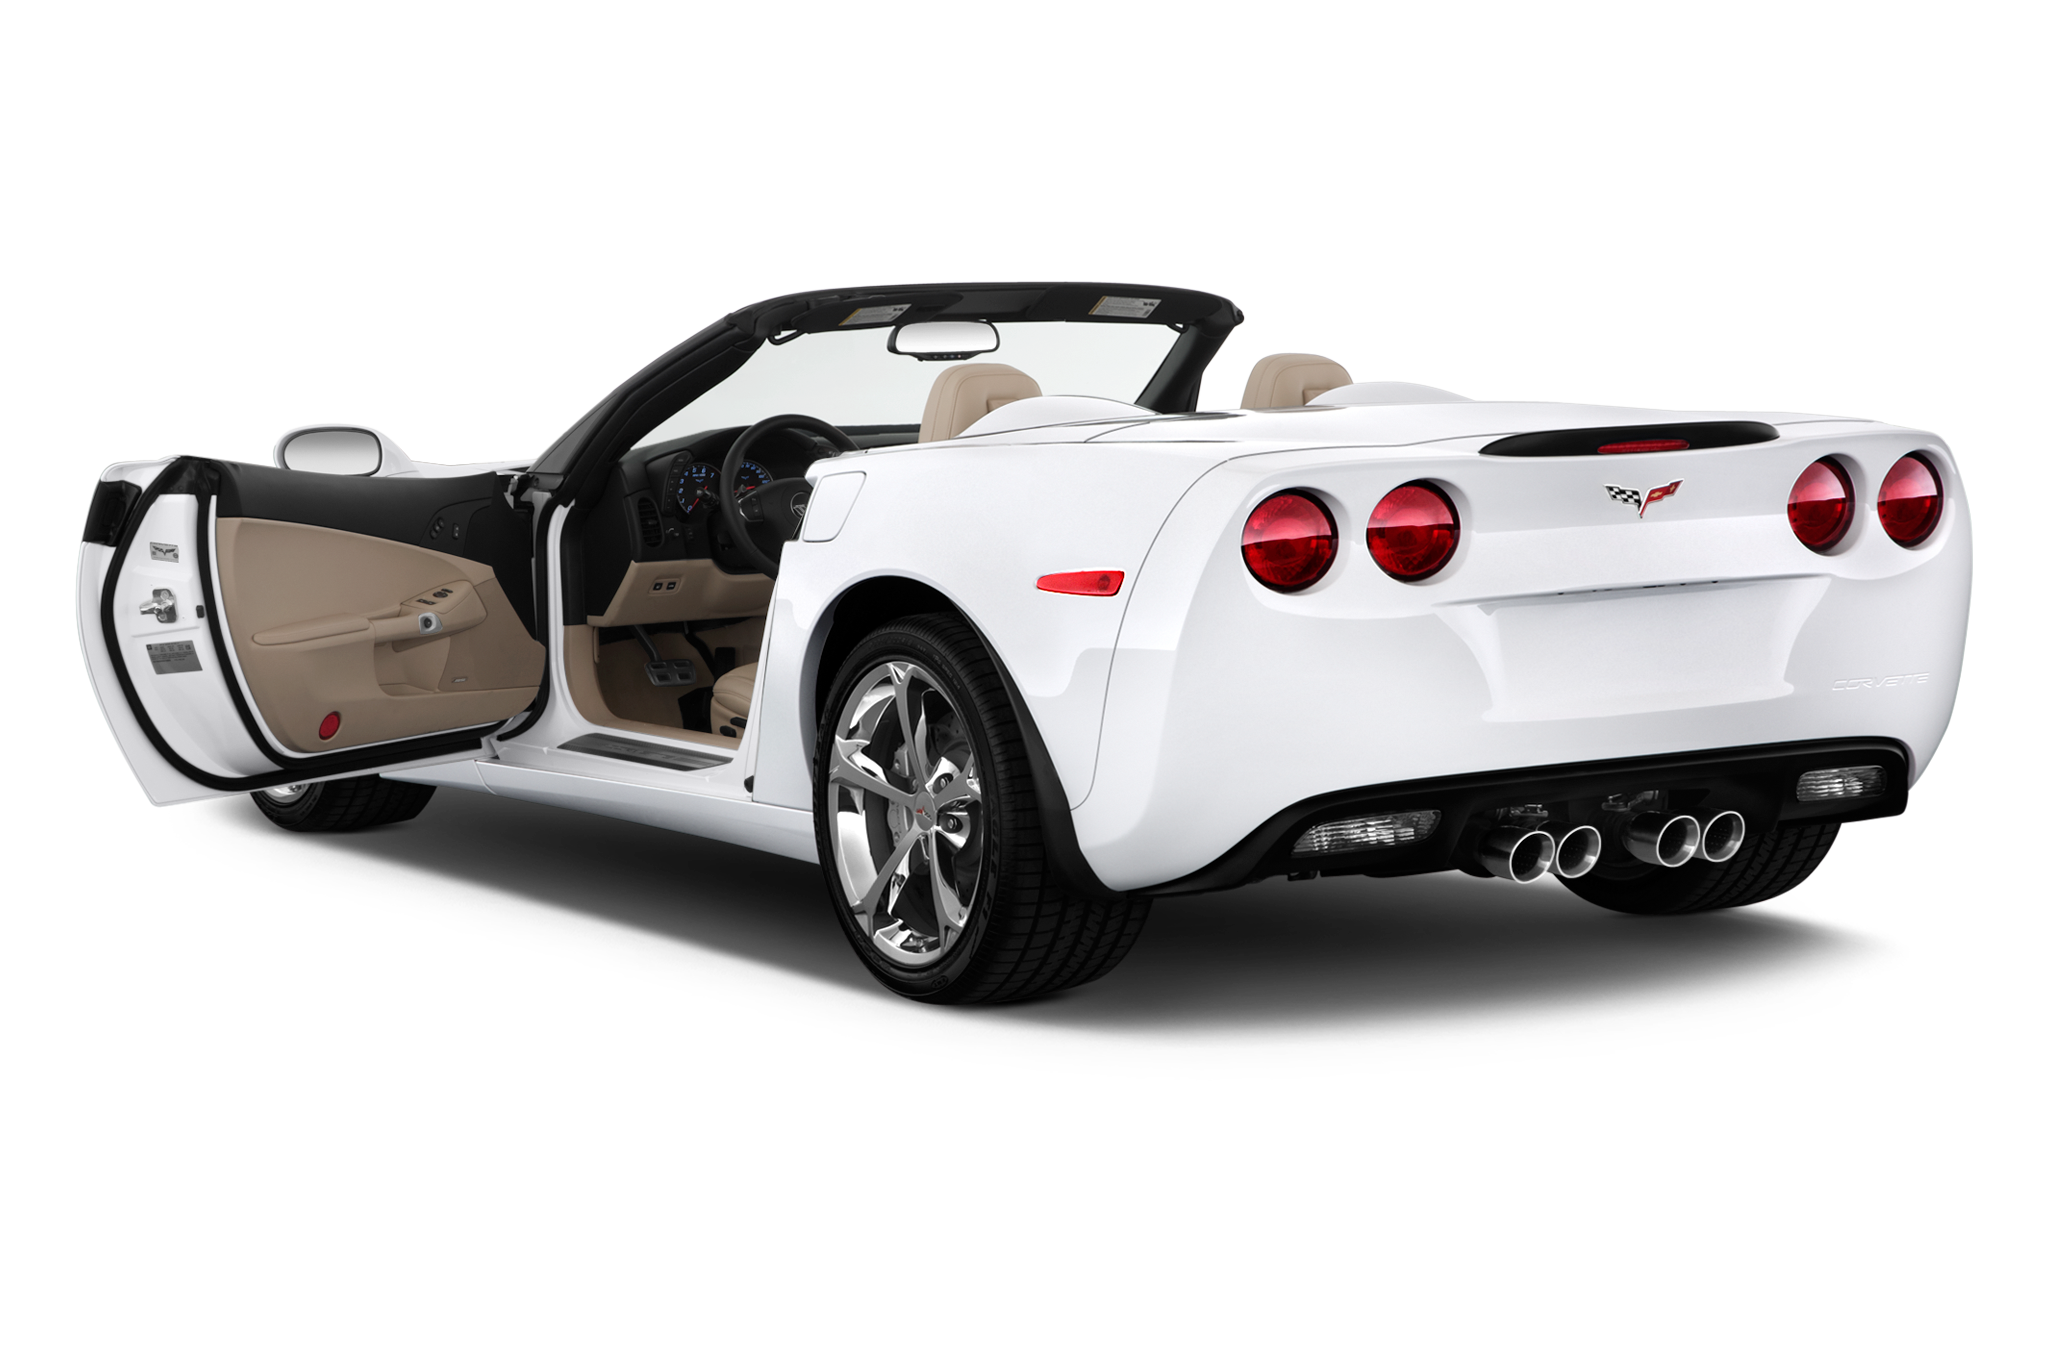 Download Chevrolet Corvette PNG Image for Free.